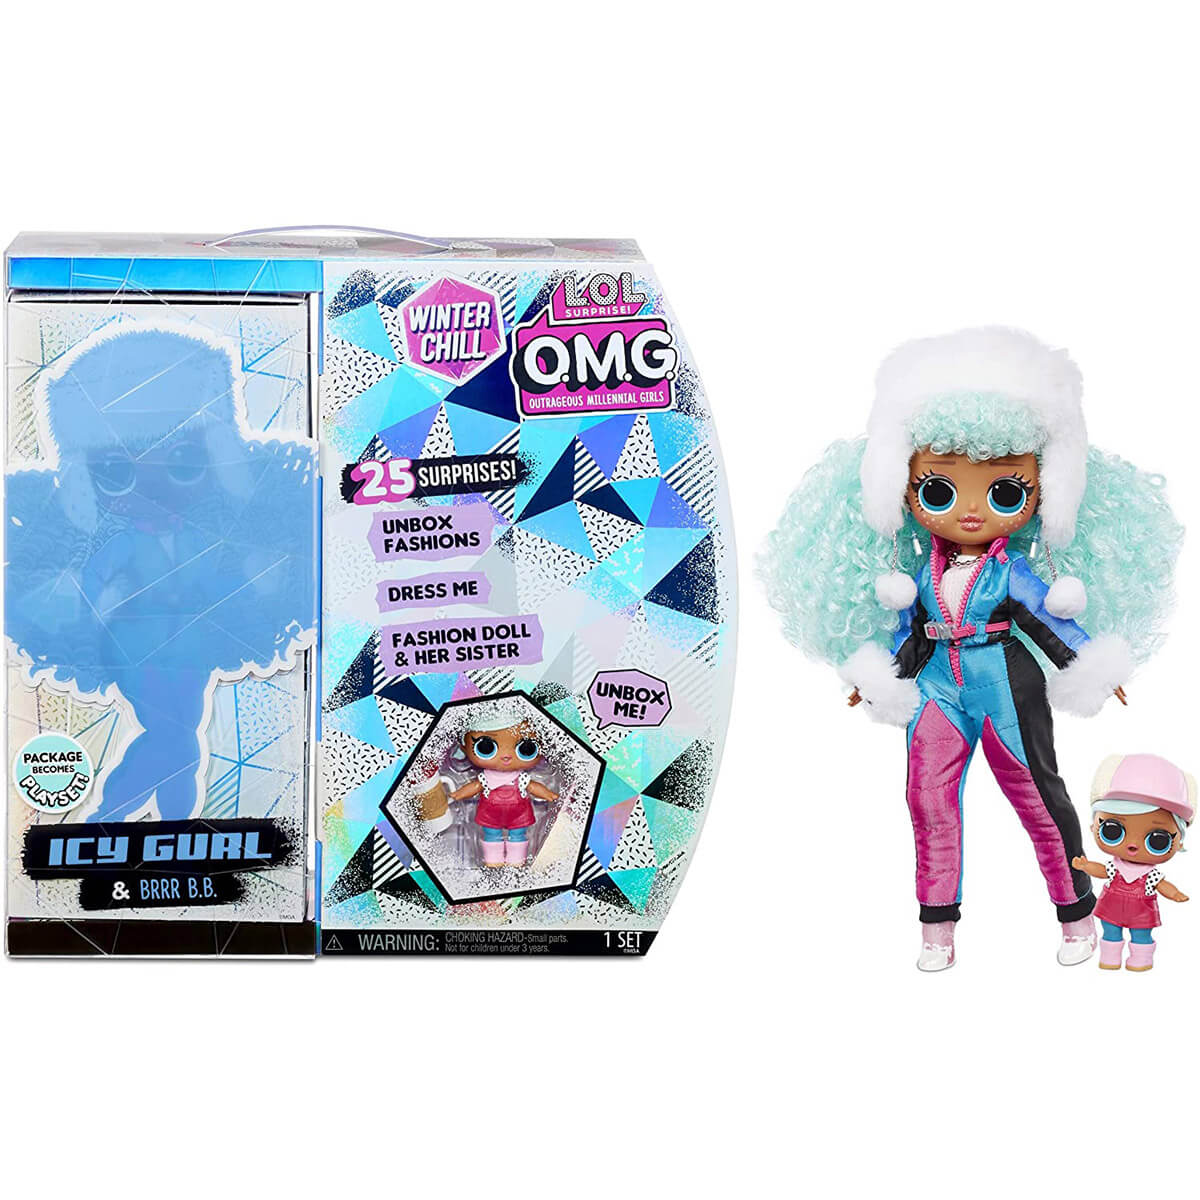 L.O.L. Surprise! O.M.G. Winter Chill Icy Gurl Fashion Doll with 25 Surprises